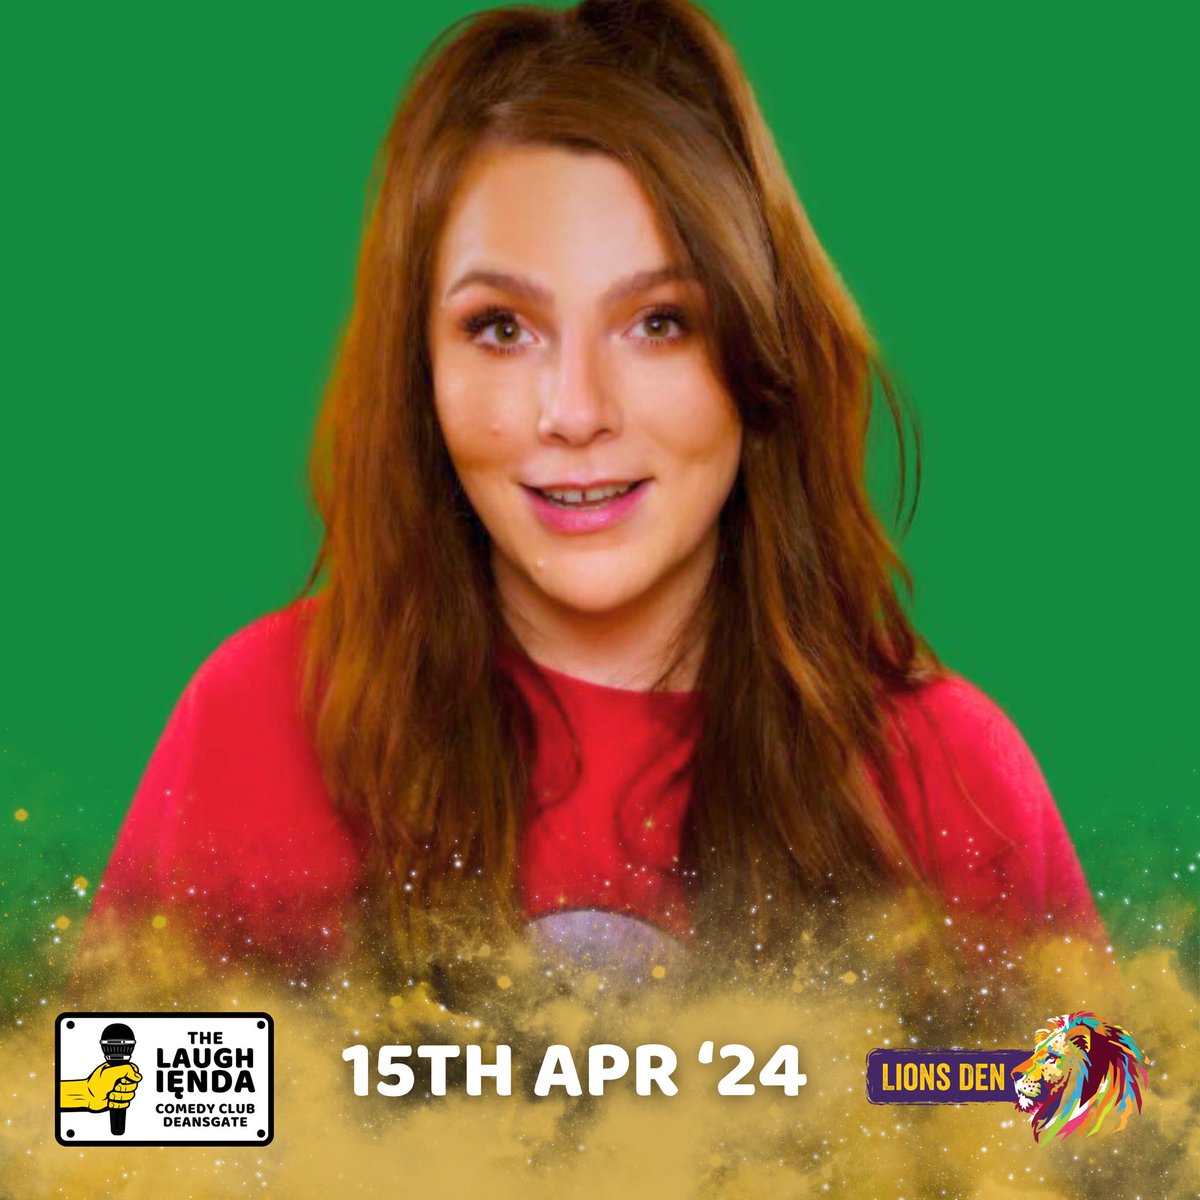 This Monday’s show at @LionsDenMCR will be headlined by the HILARIOUS @AnnaRoseThomas! 🏆 BBC New Comedy Award Winner 🏆 ‘Sweeps everyone up with her daffy charm’ - Chortle FREE tickets here 🎟️ Laughienda.com #comedy #manchester #standup #free #funny #comedian